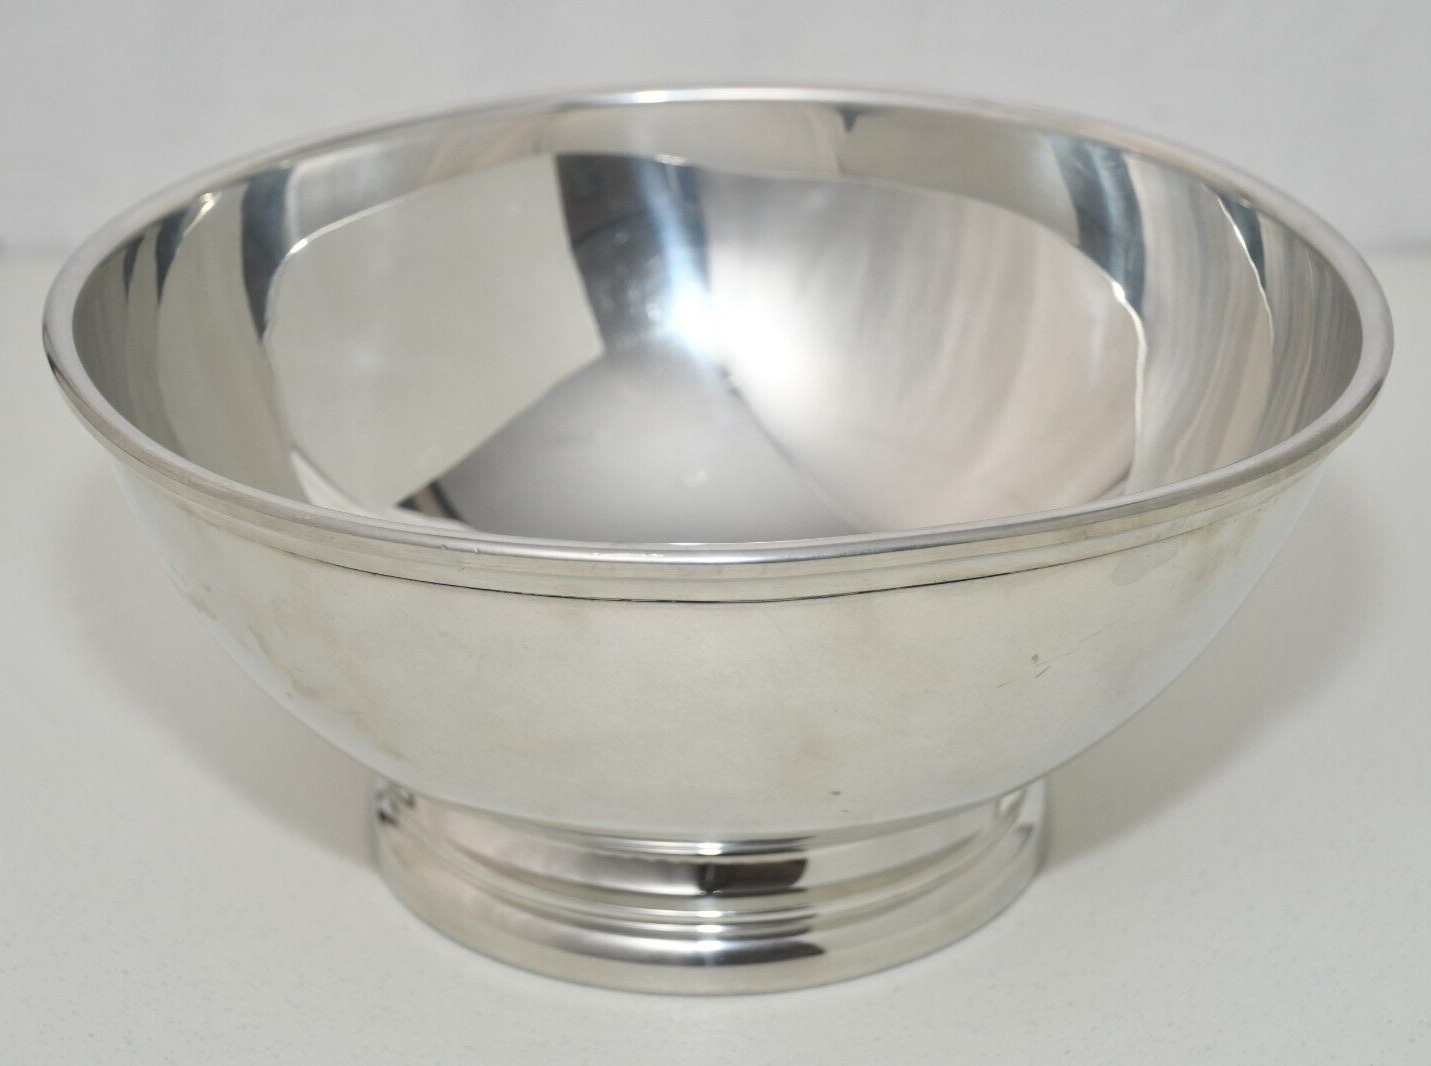 Williamsburg Stieff Pewter CW7-30 Large Footed Serving Bowl 10 7/8” Dia. 5\